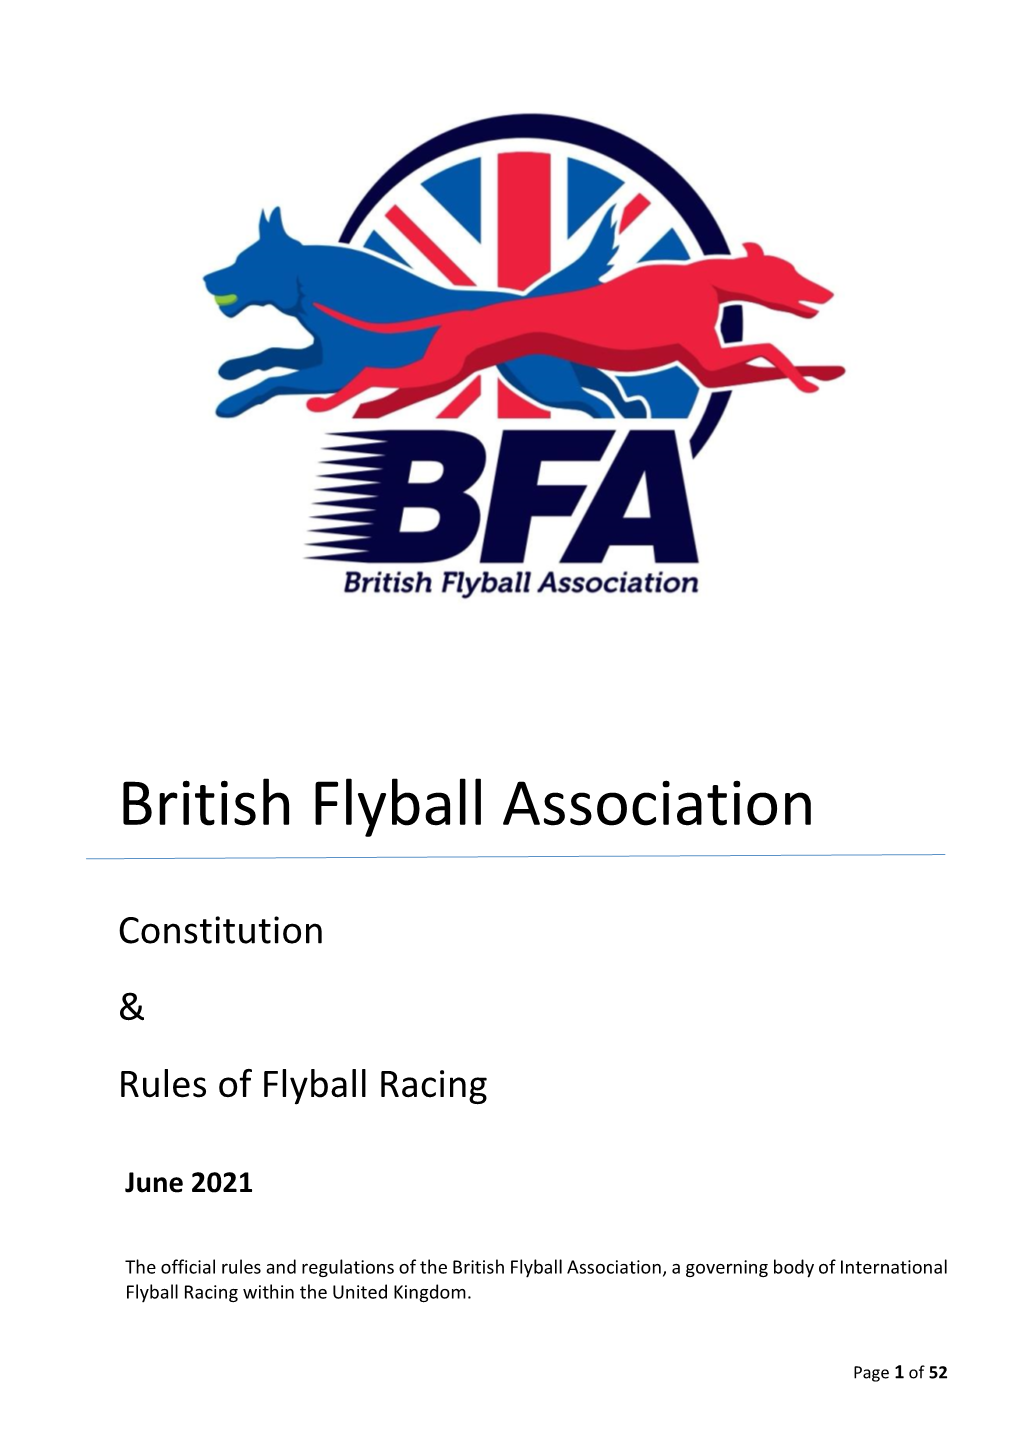 BFA Constitution & Rules of Flyball Racing June 2021